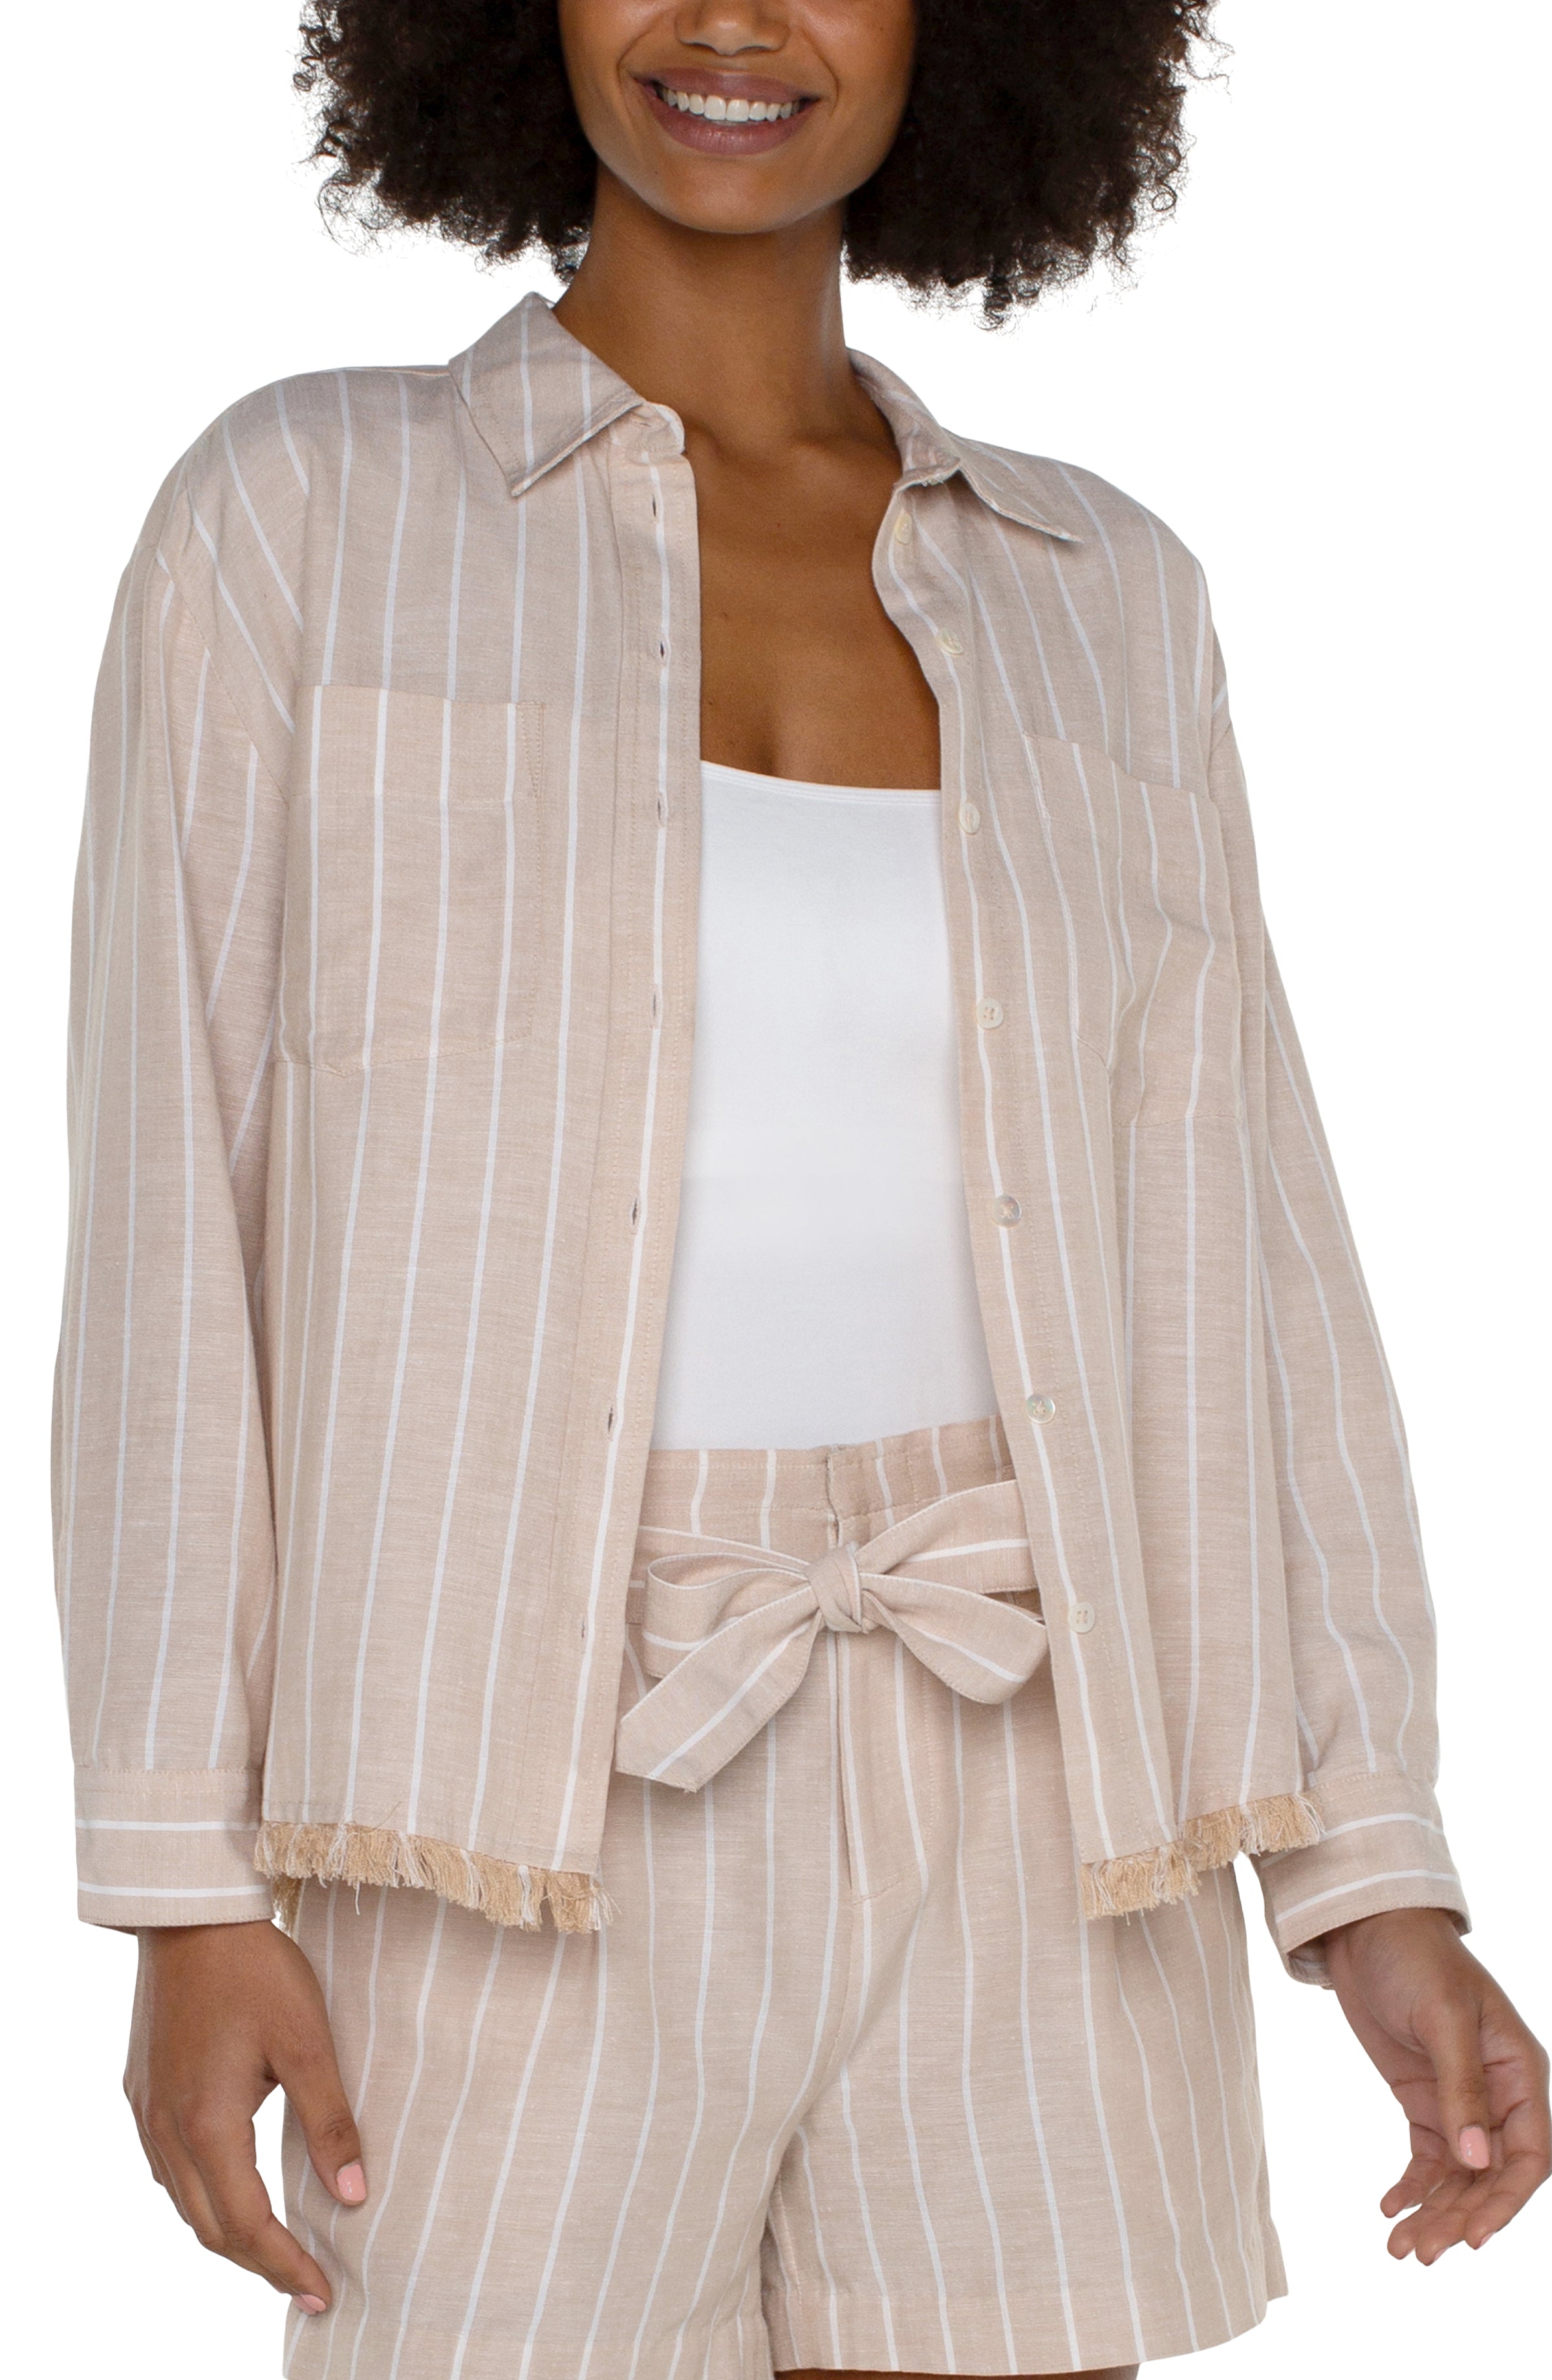 LVP Long Sleeve Button Front Shirt w Fray - Tan Yarn Dyed Stripe Open Front View